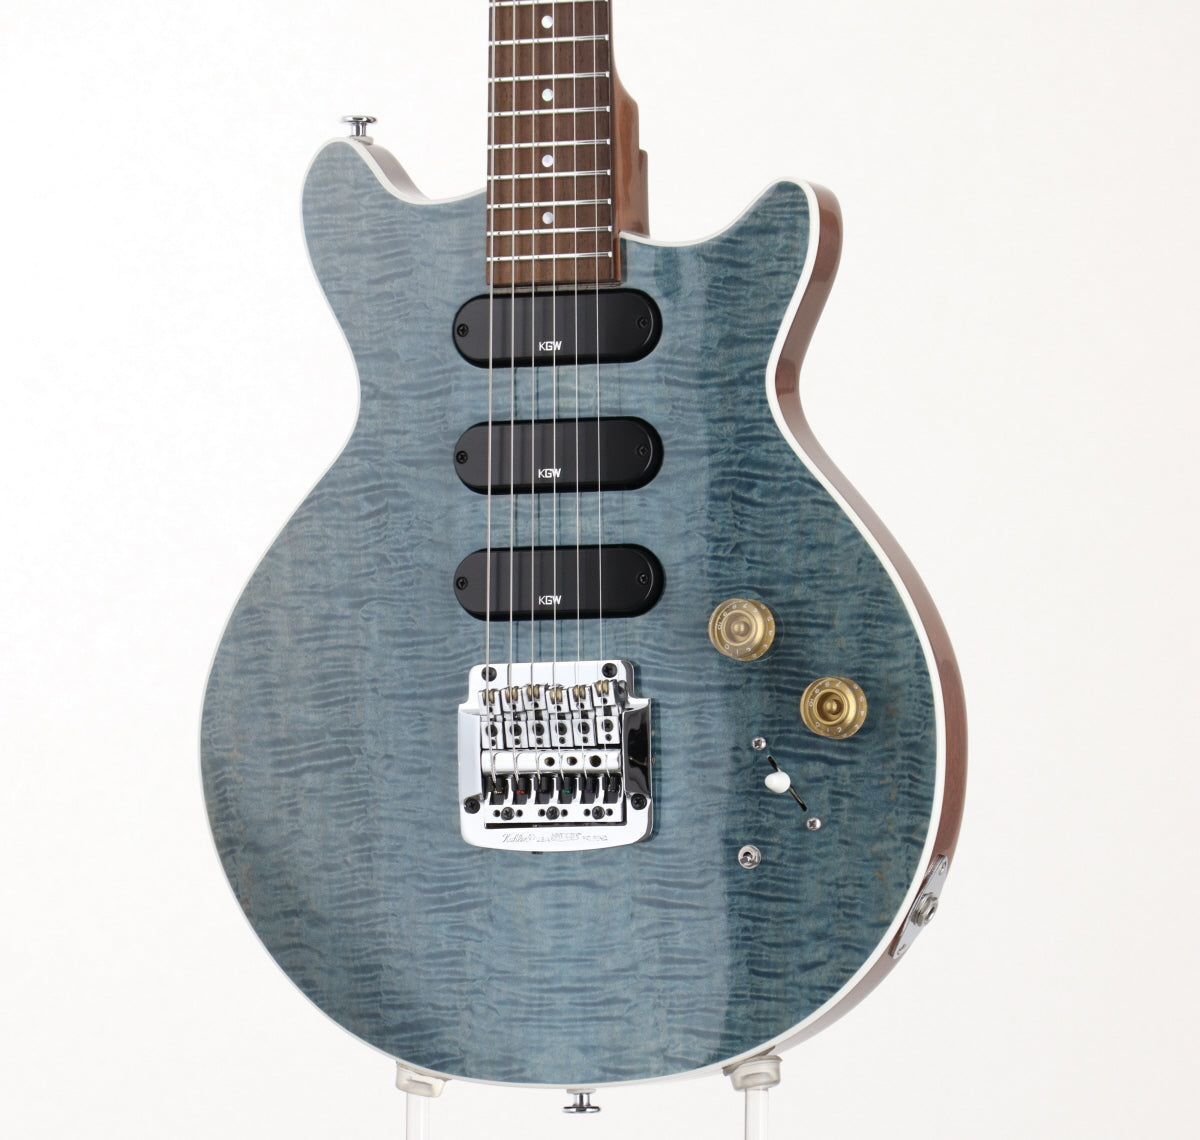 [SN T0021] USED Kz Guitar Works / Kz One Solid 3S11 Kahler See-through Blue [09]